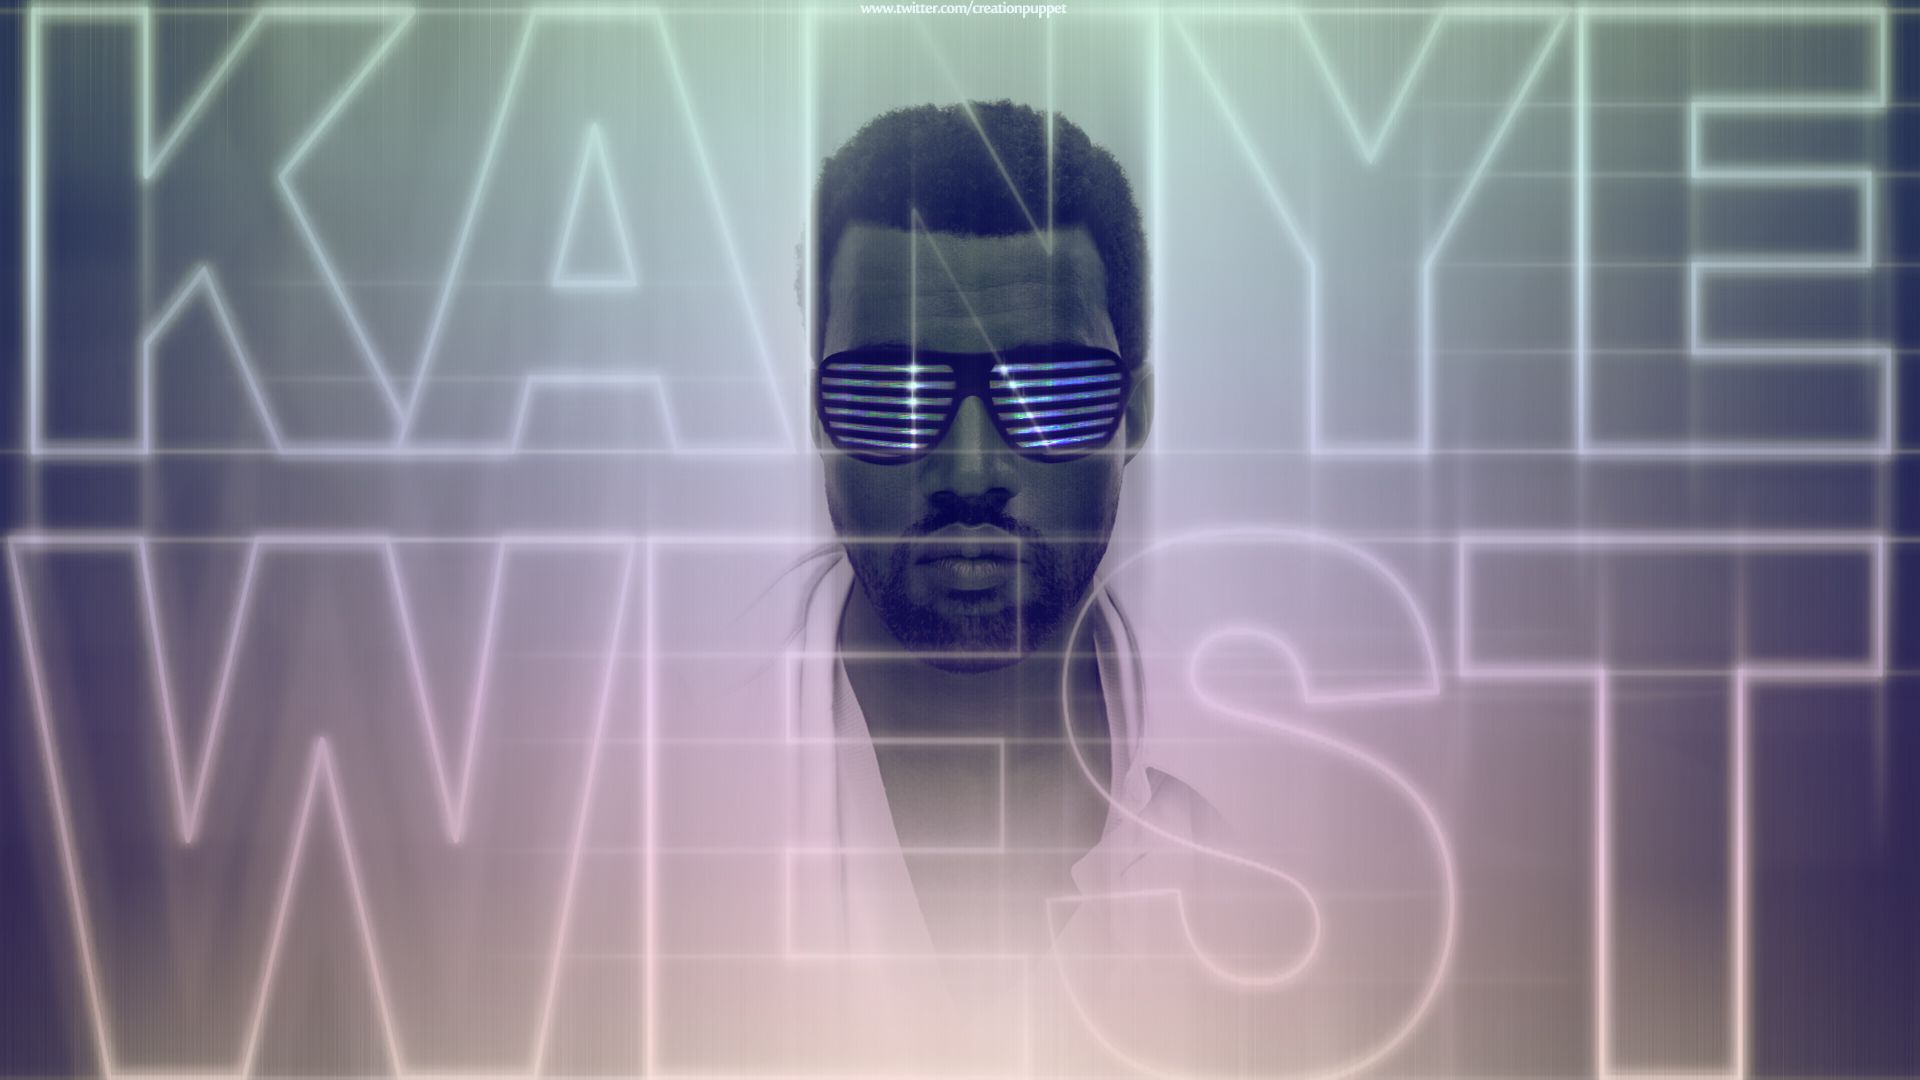 21 Kanye West HD Wallpapers | Backgrounds - Wallpaper Abyss